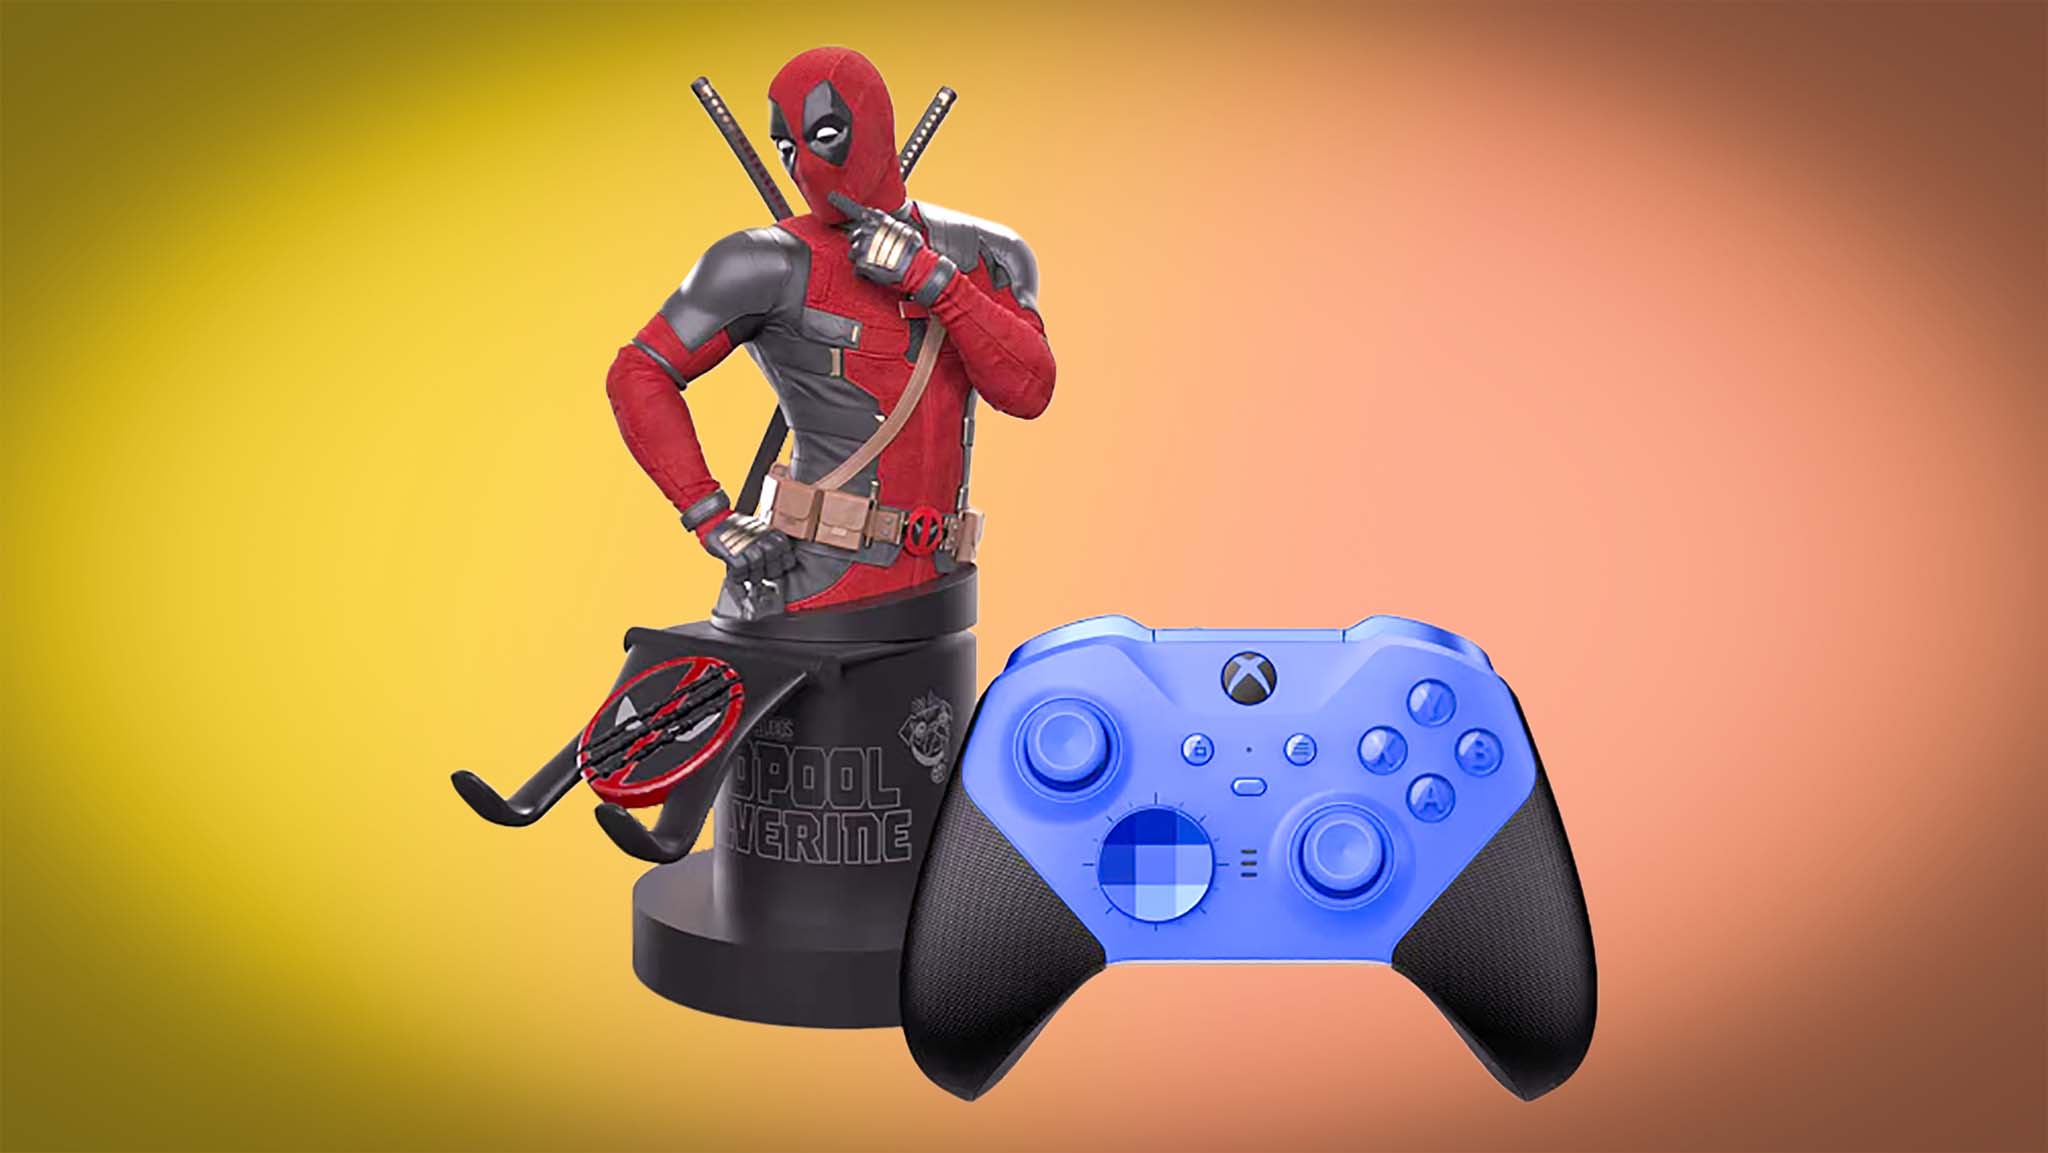 Xbox Series X|S Controller with Deadpool Controller stand.